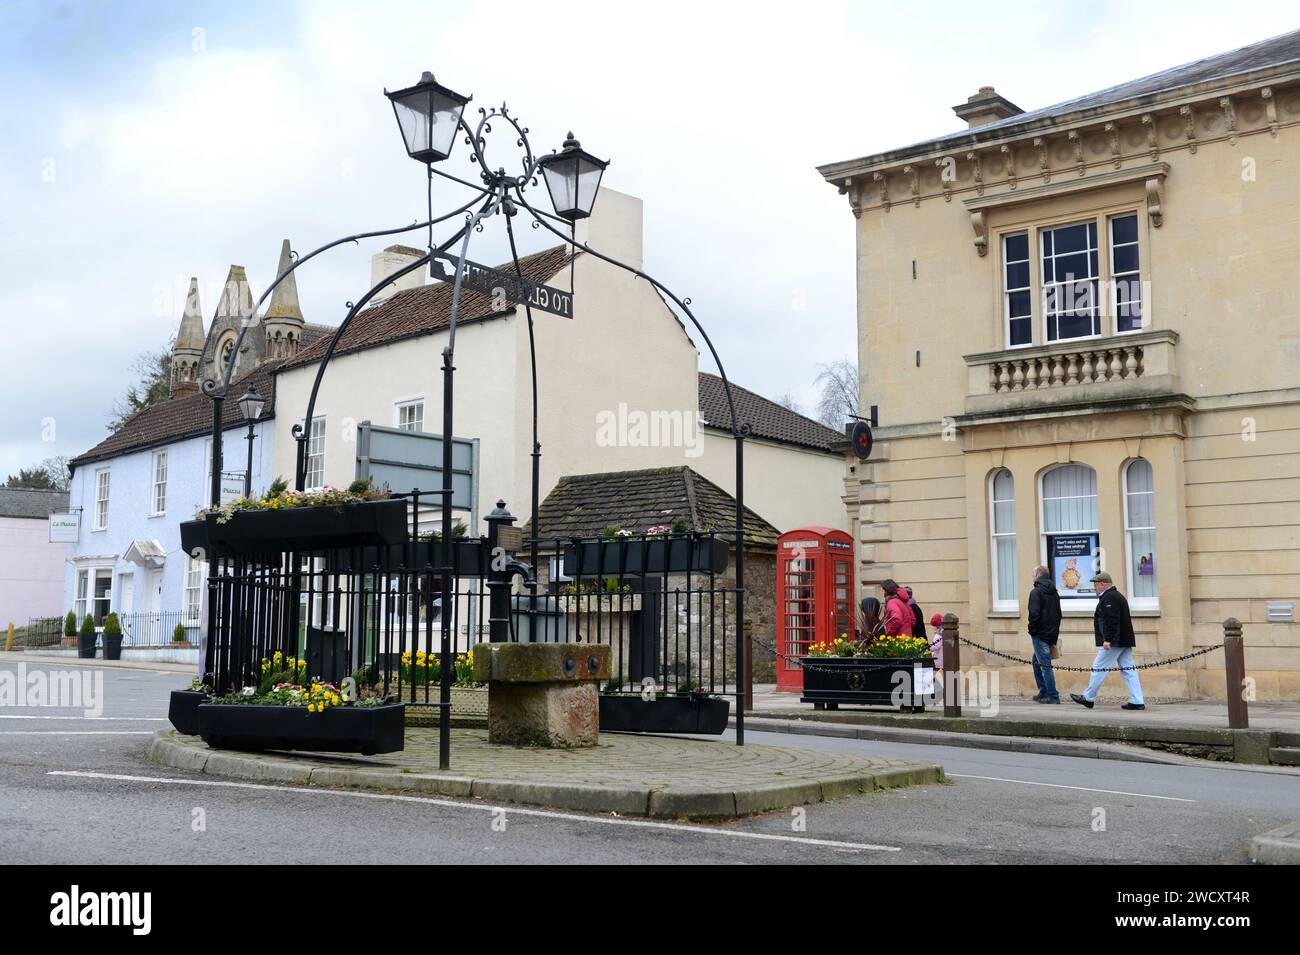 The 'Pump & Canopy' in Thornbury in South Gloucestershire, UK Stock Photo